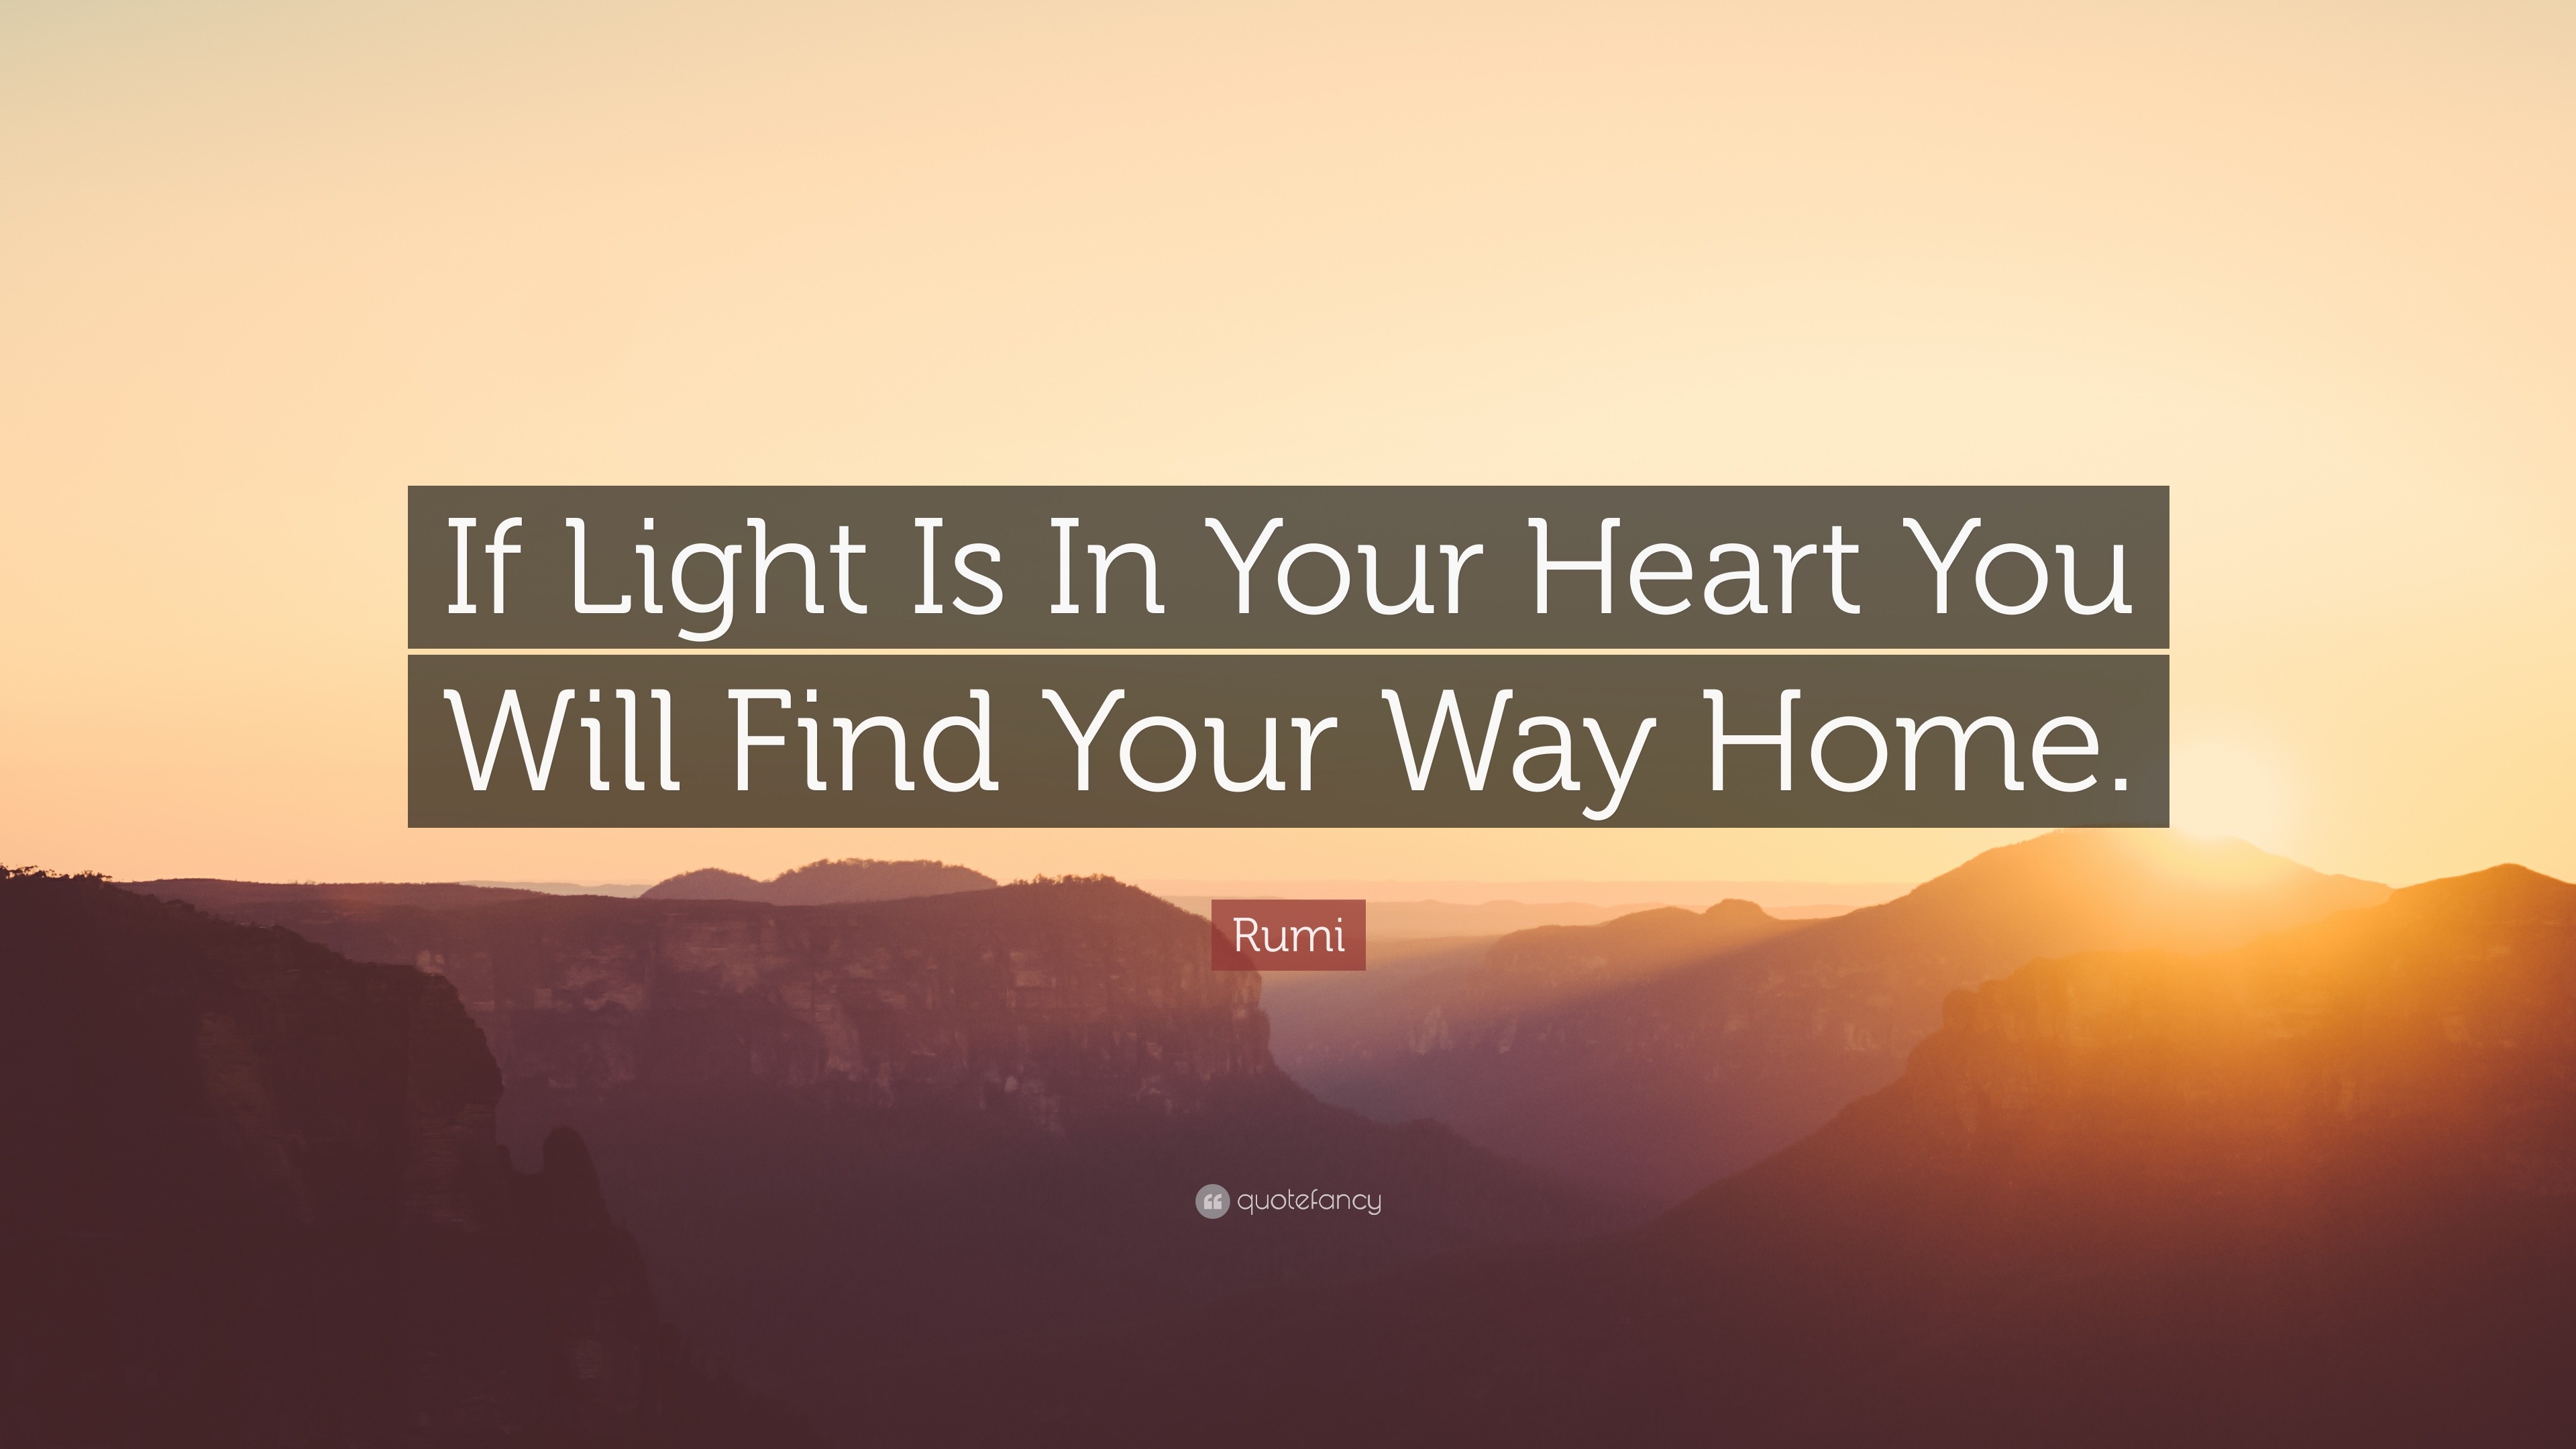 Rumi “If Light Is In Your Heart Will Find Your Way Home.”